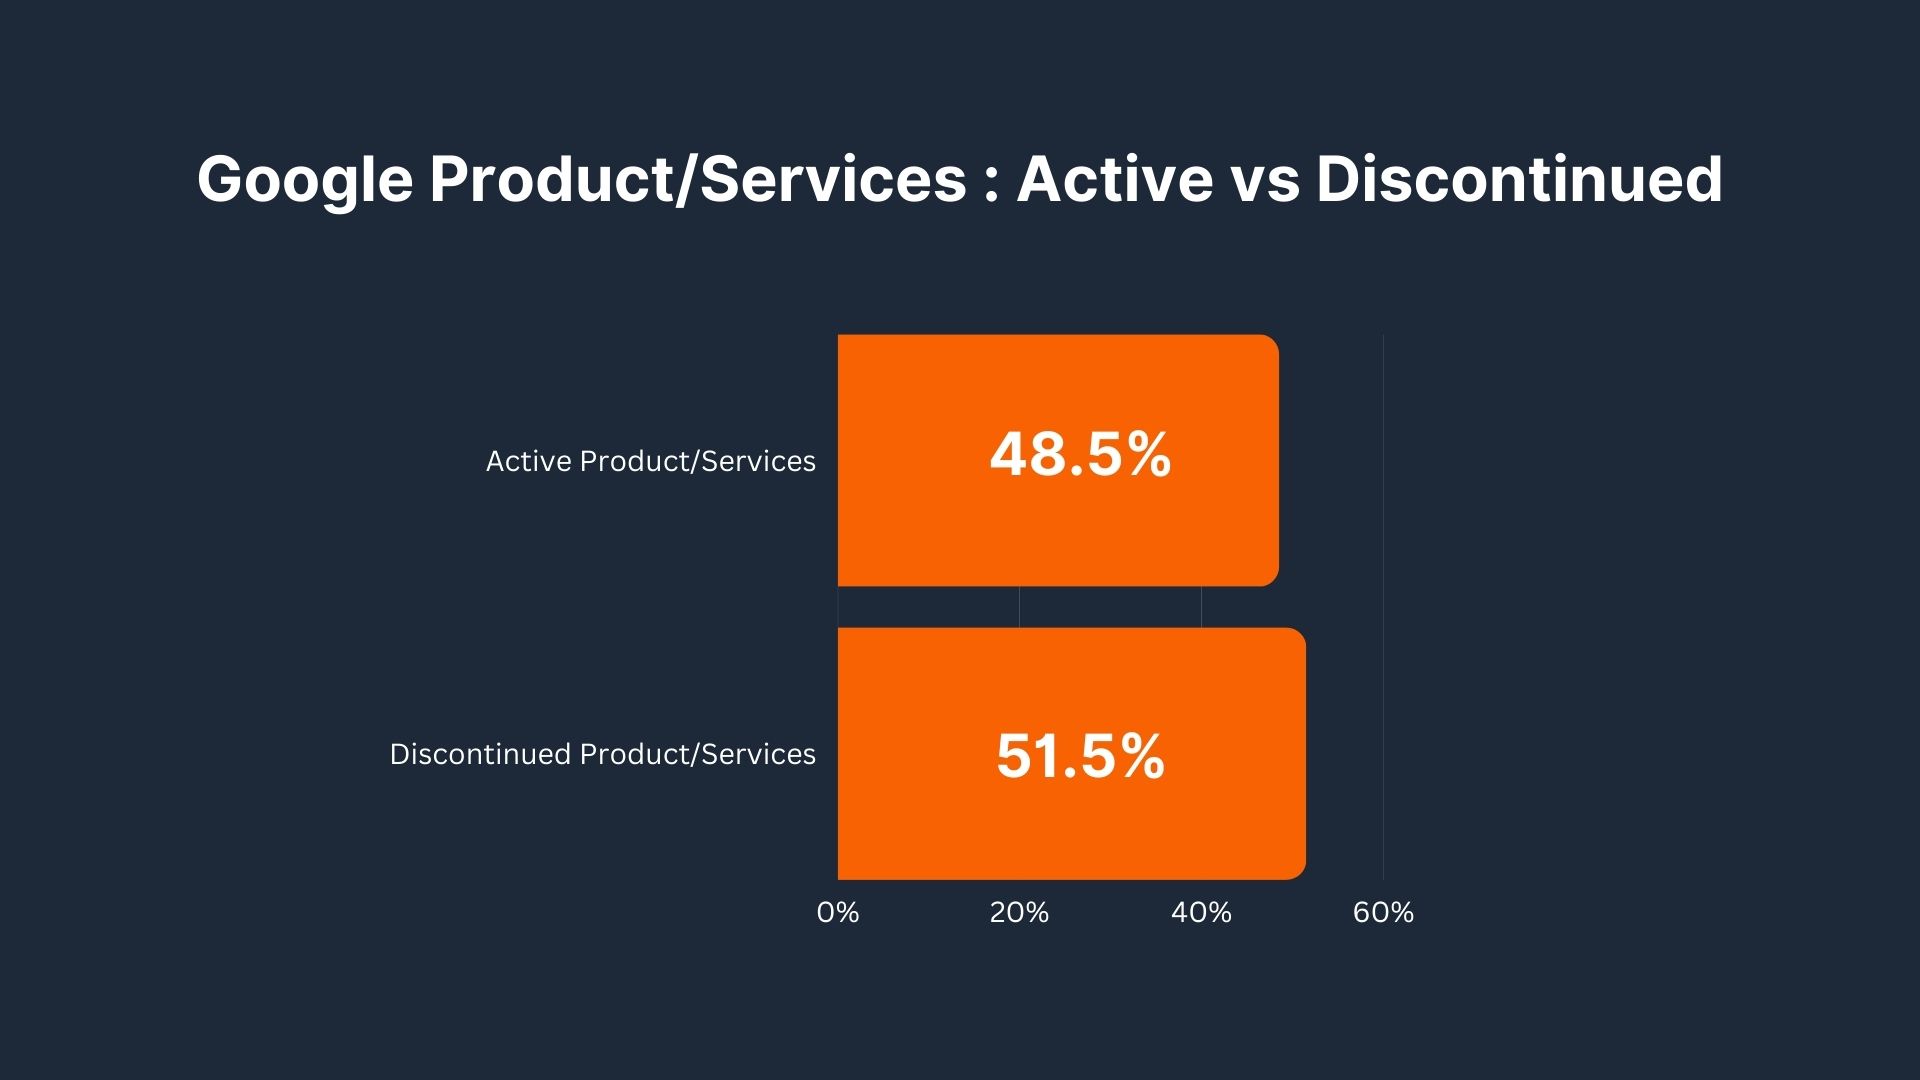 Google Product/Services : Active vs Discontinued